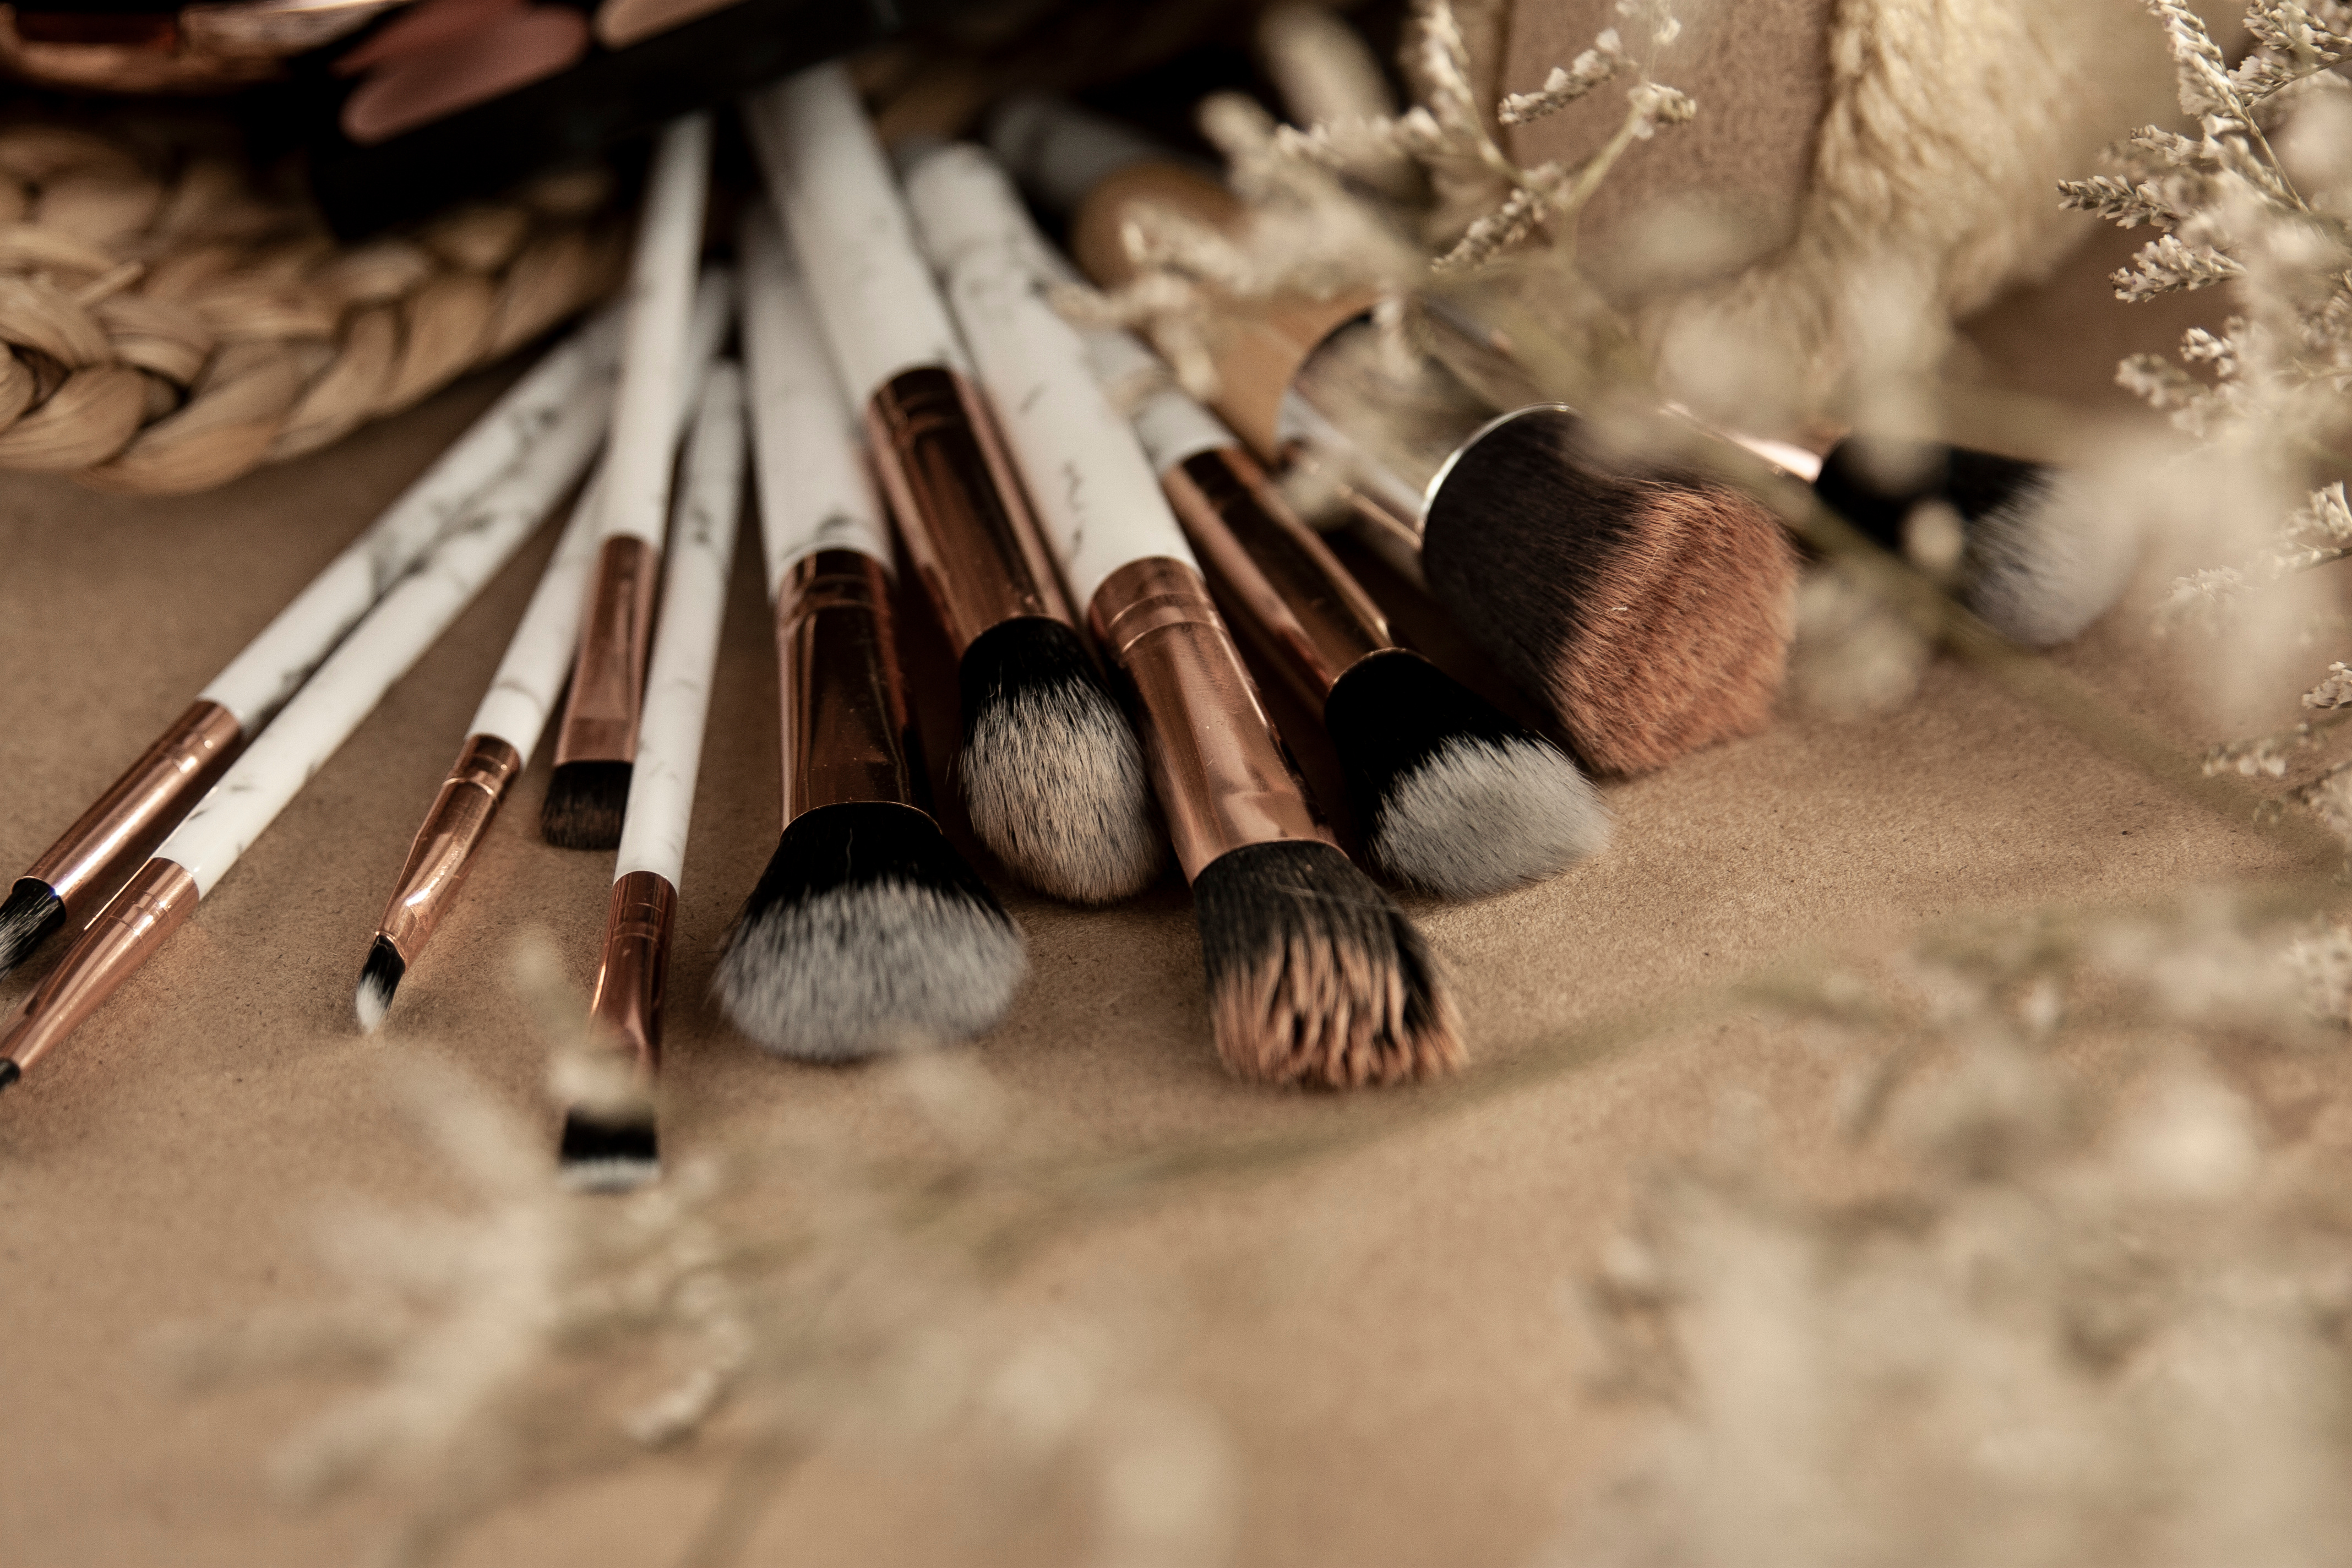 Makeup brushes spread out on table